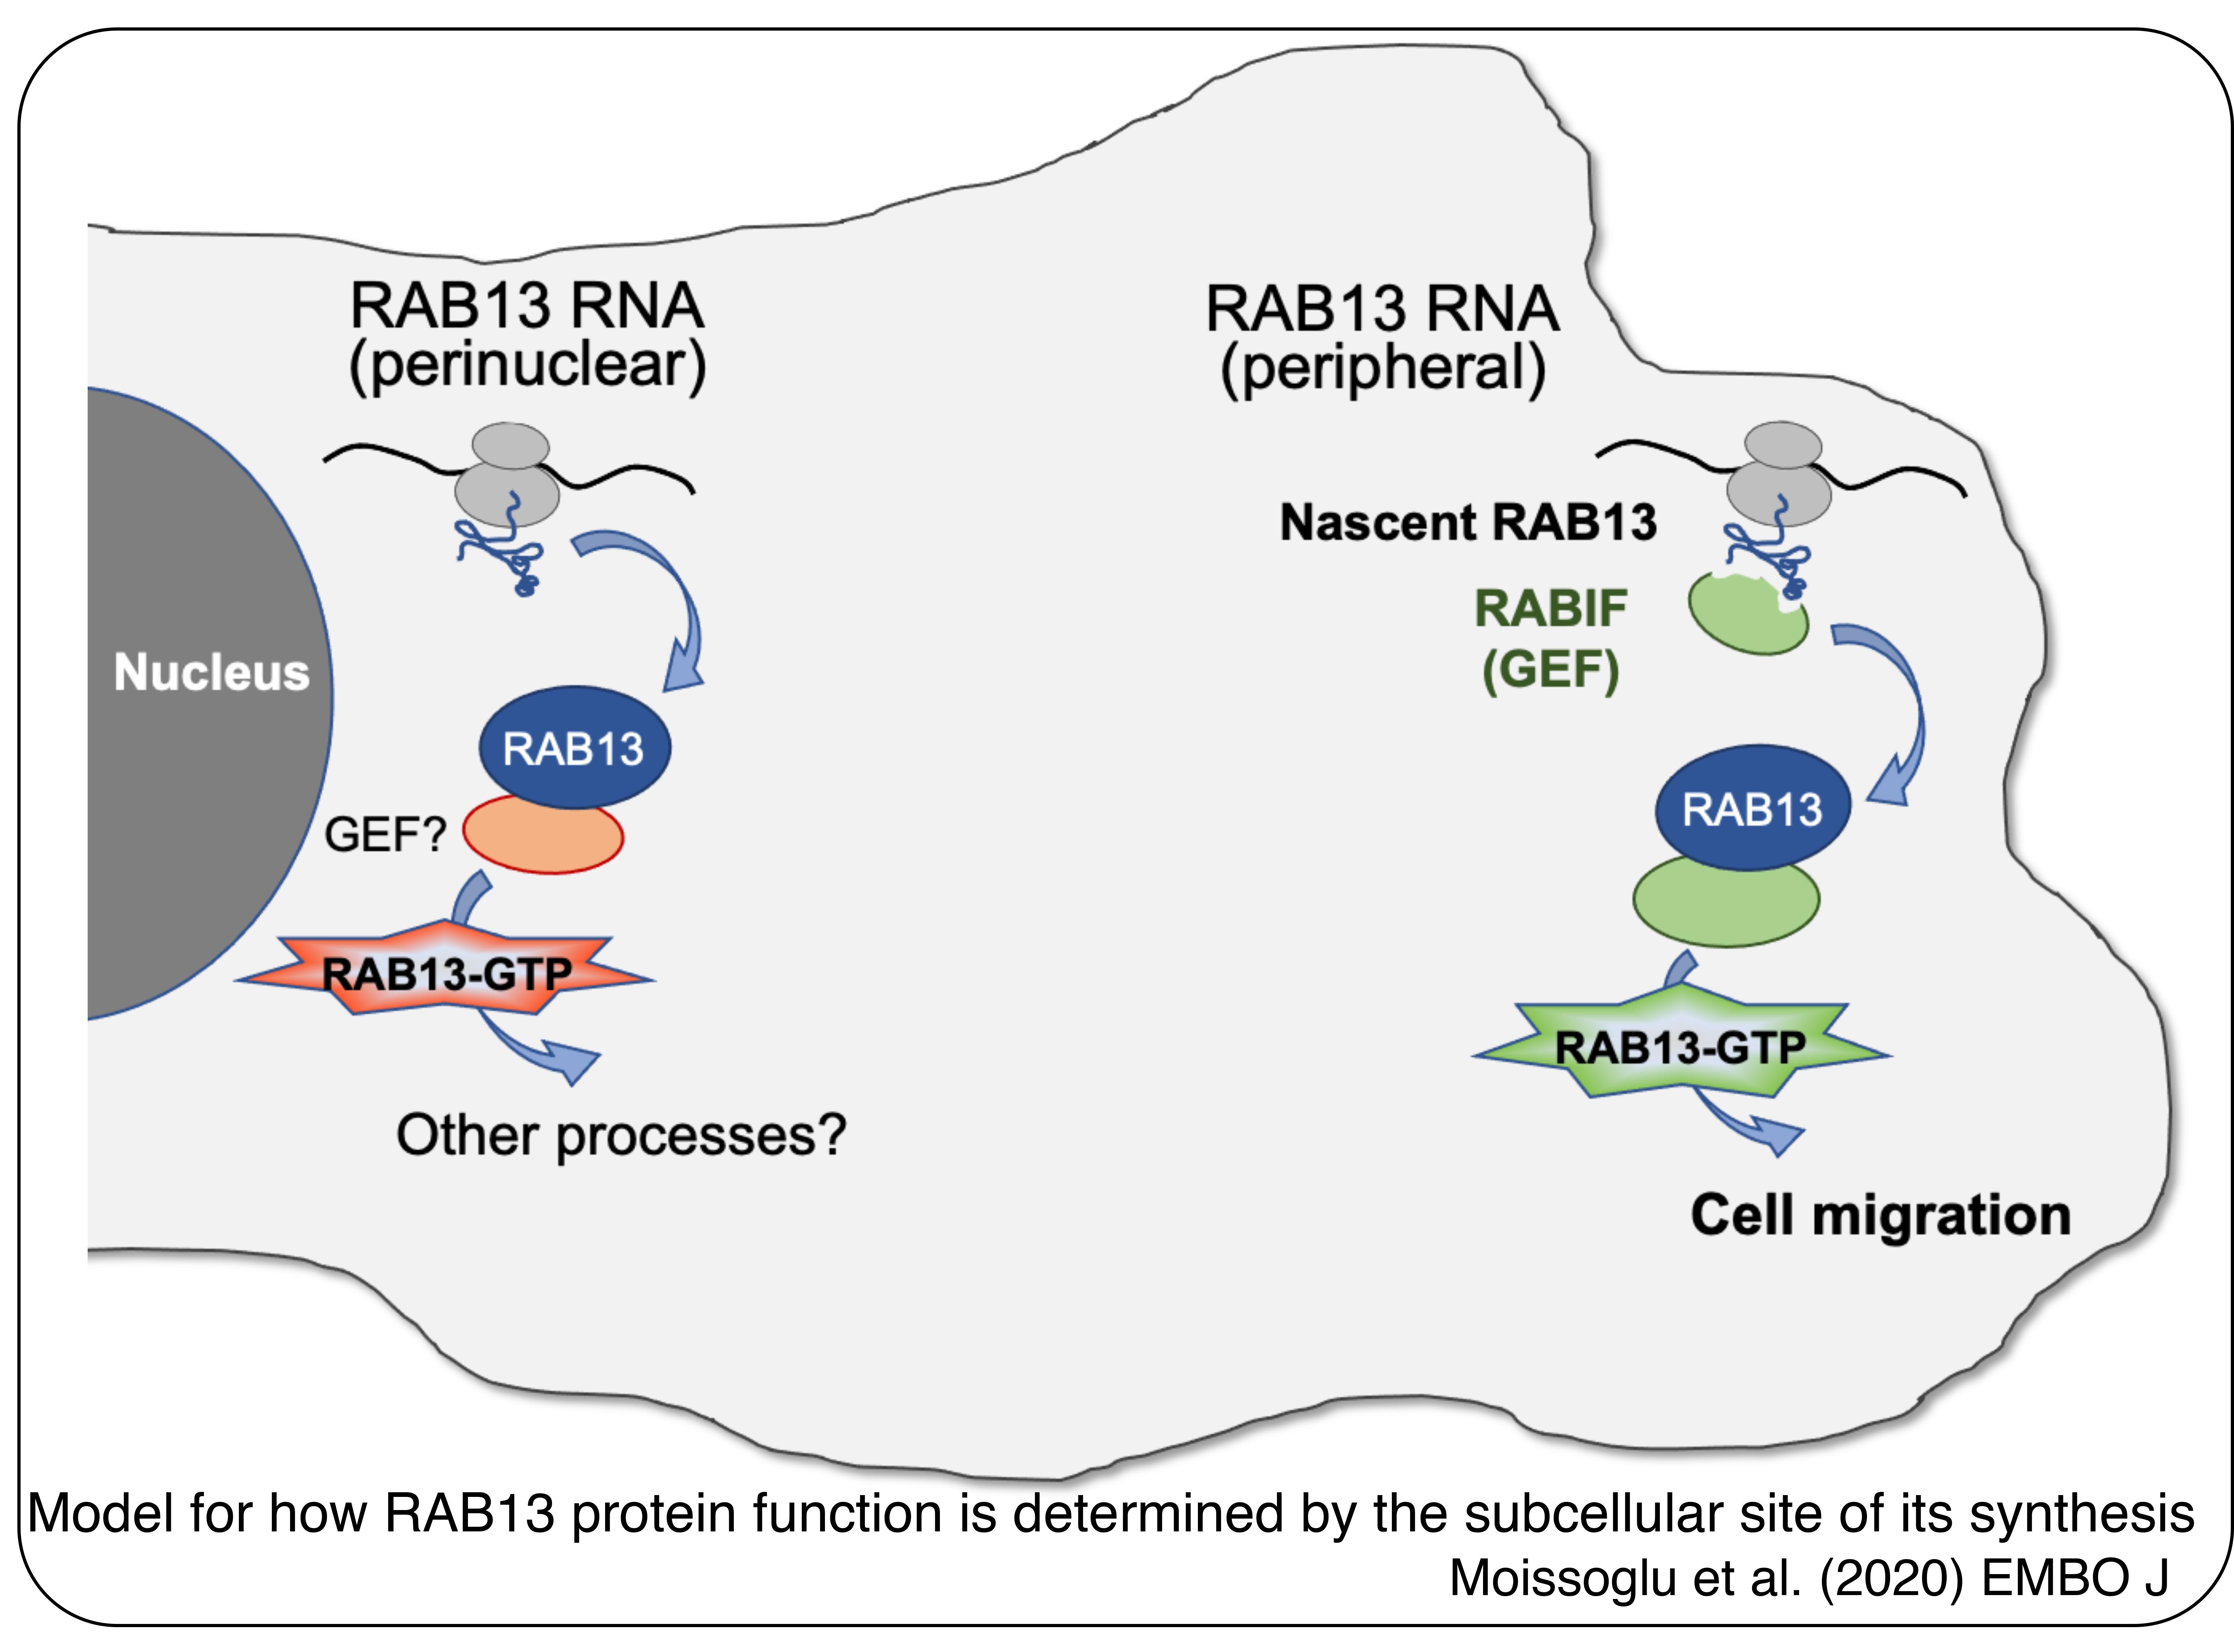 Model for how RAB13 function is determined by the subcellular site of its synthesis.